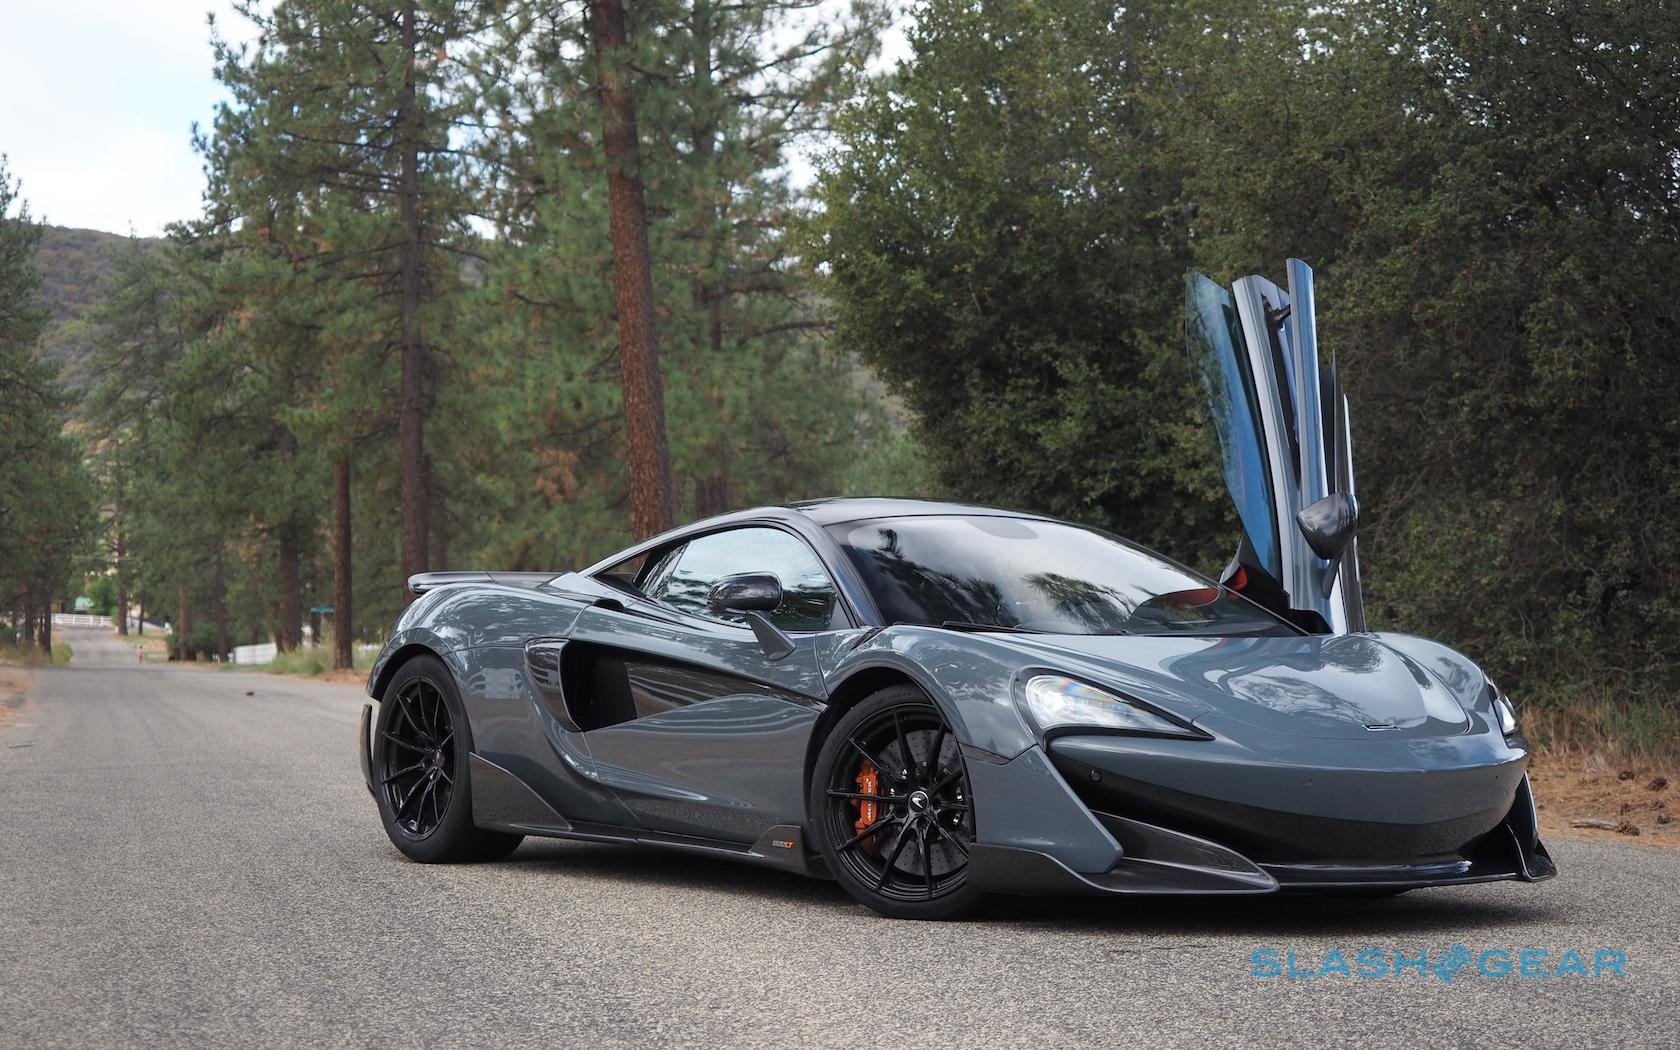 The McLaren 600LT is not what I expected